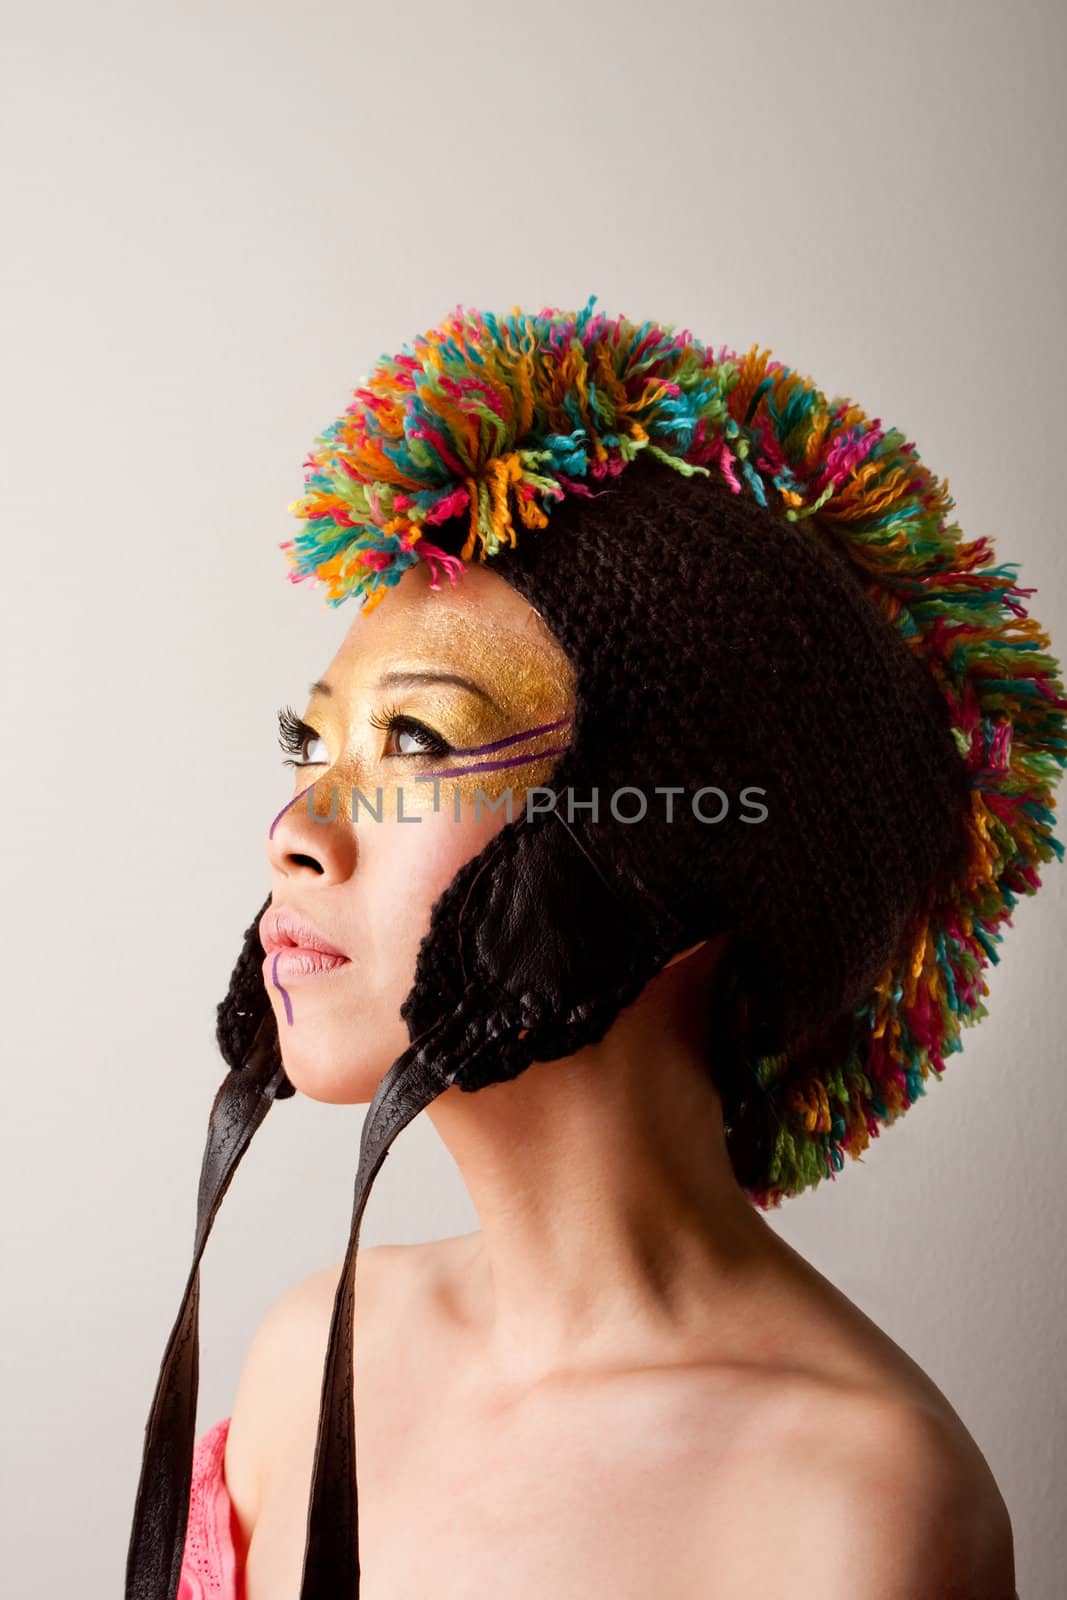 Colorful mohawk hat by phakimata